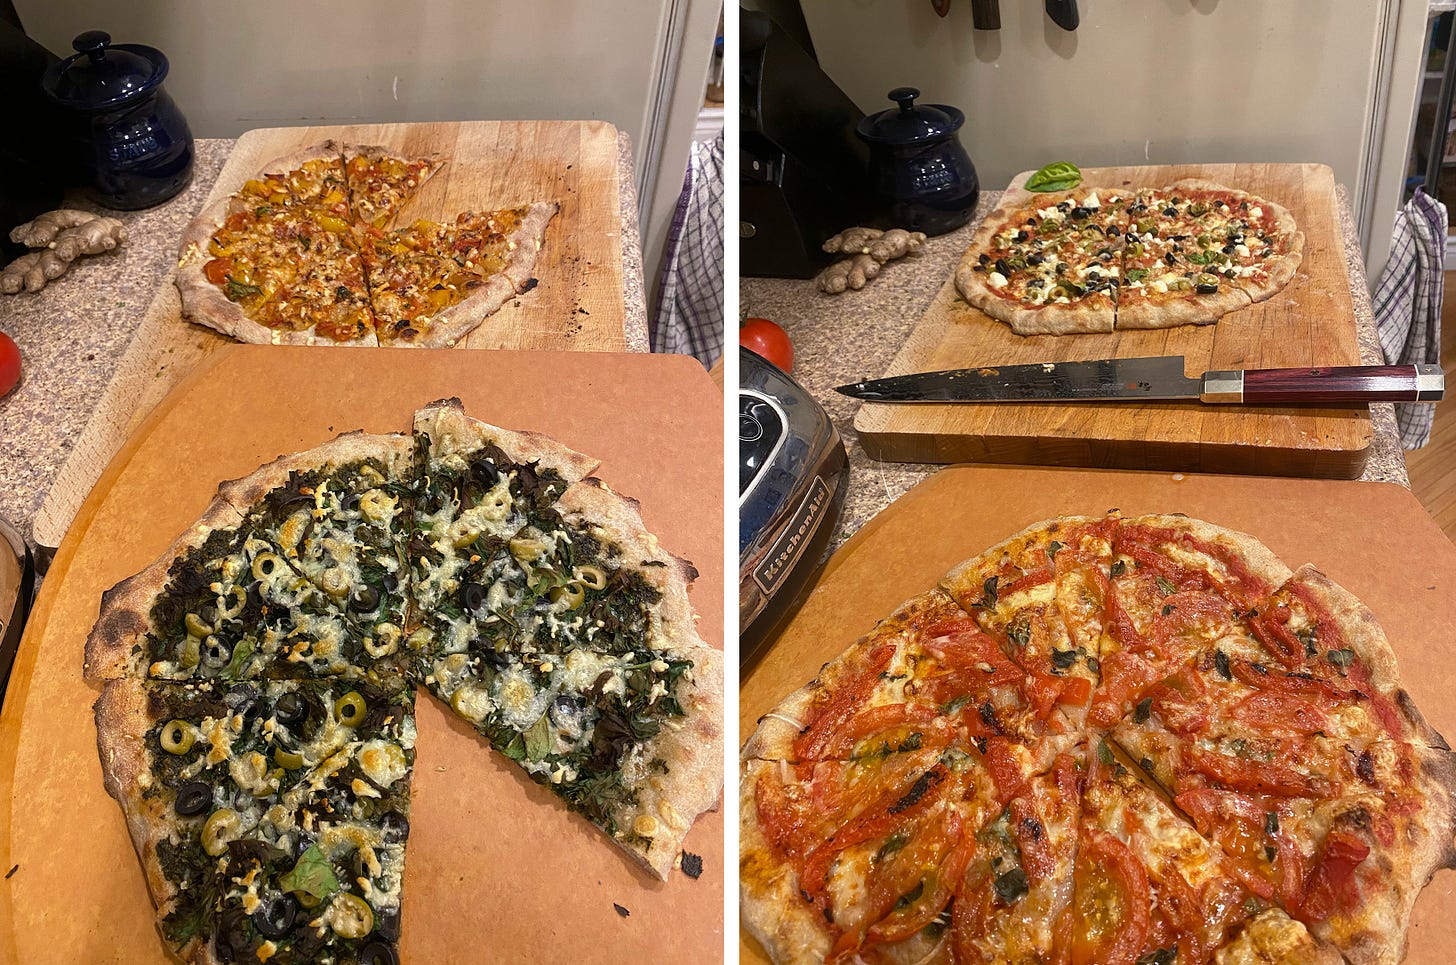 Left photo: the pesto and shakshuka pizzas described above, each with a slice missing. Right photo: the olive and tomato pizzas described above. A large knife sits on the cutting board between them.